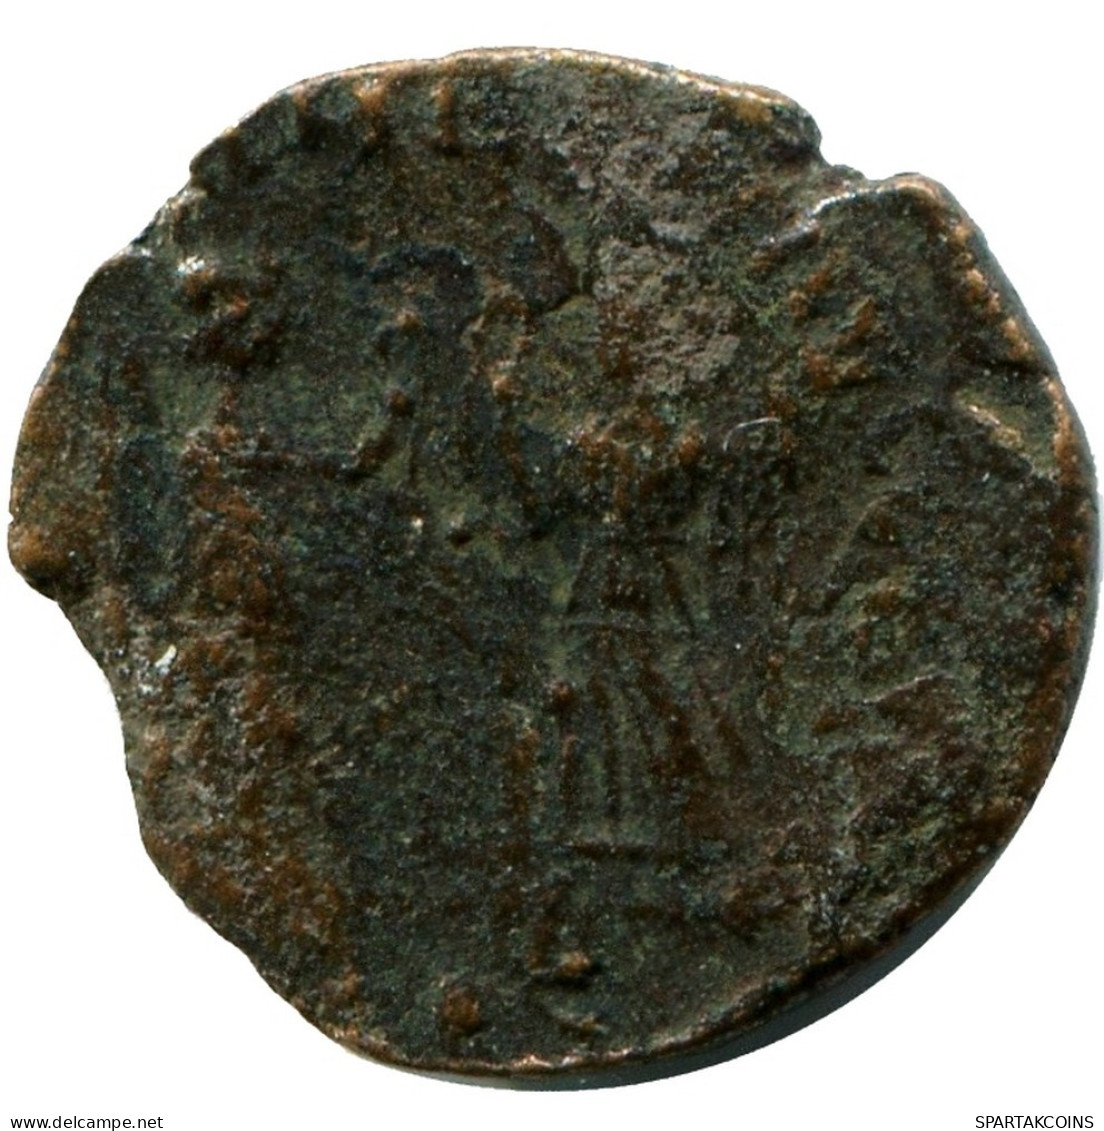 CONSTANS MINTED IN ROME ITALY FROM THE ROYAL ONTARIO MUSEUM #ANC11498.14.E.A - El Impero Christiano (307 / 363)